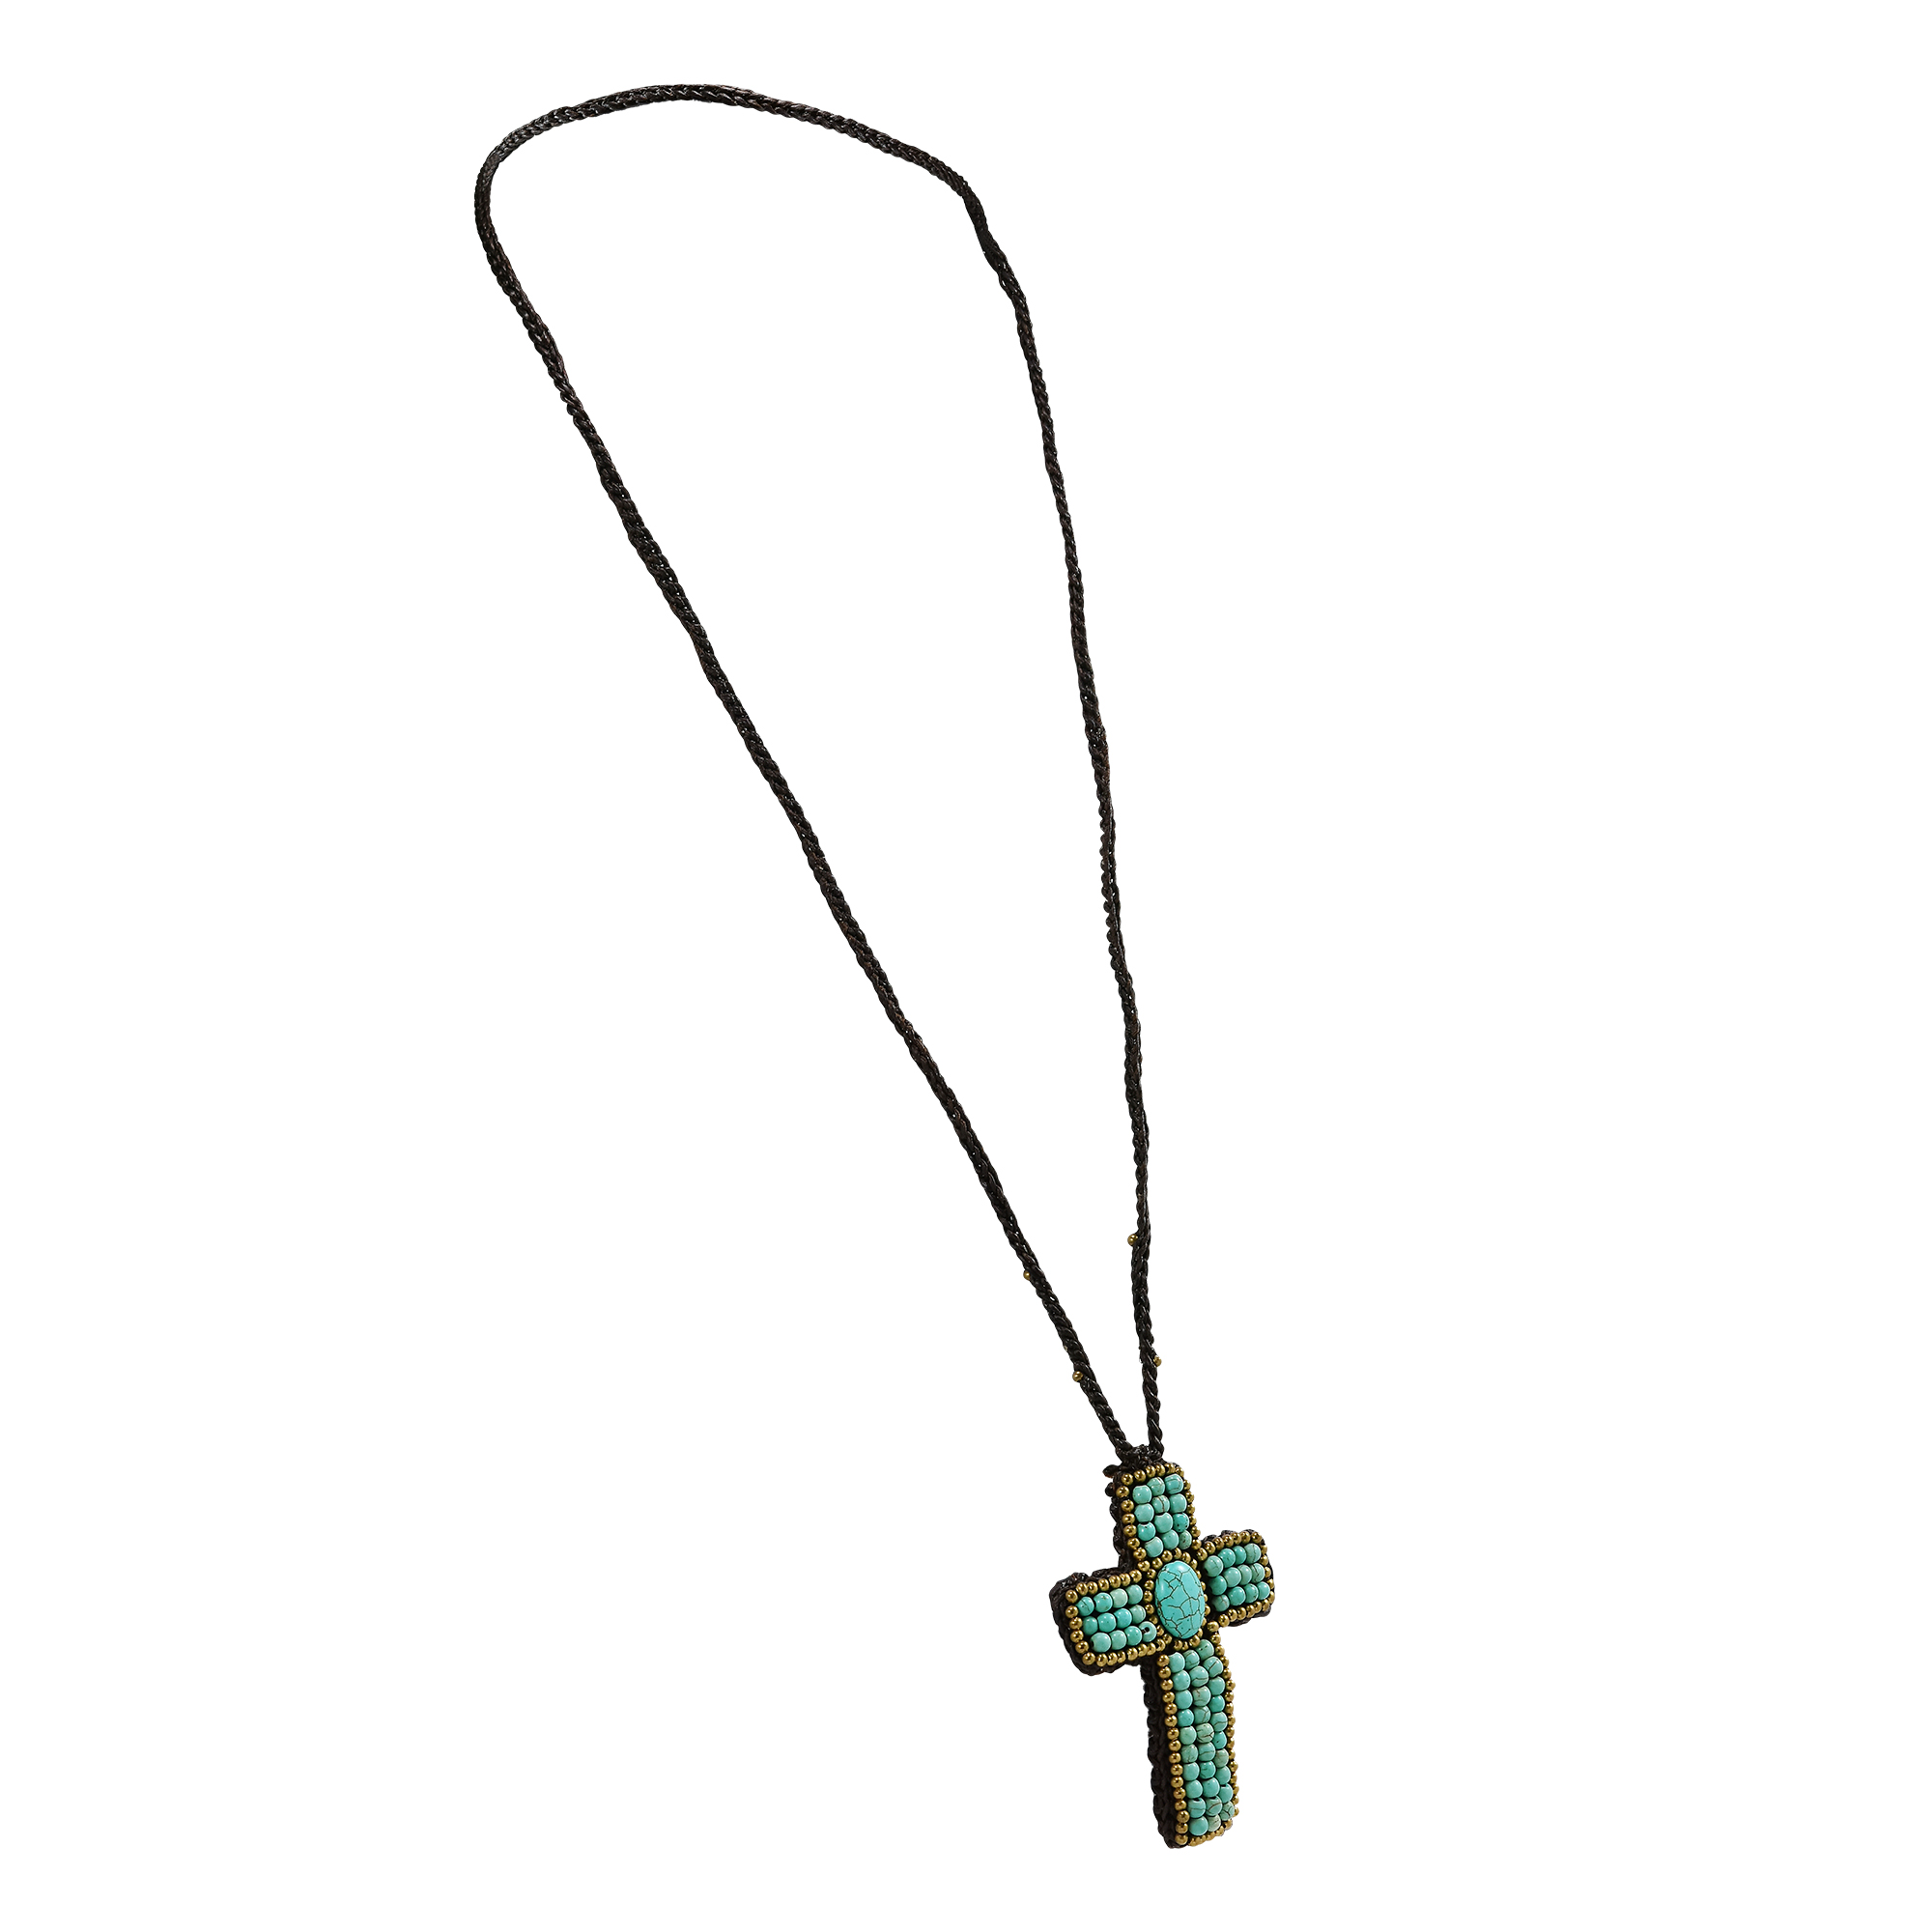 Antique Cross Turquoise Stone Brass Embellished Long Necklace - image 2 of 5